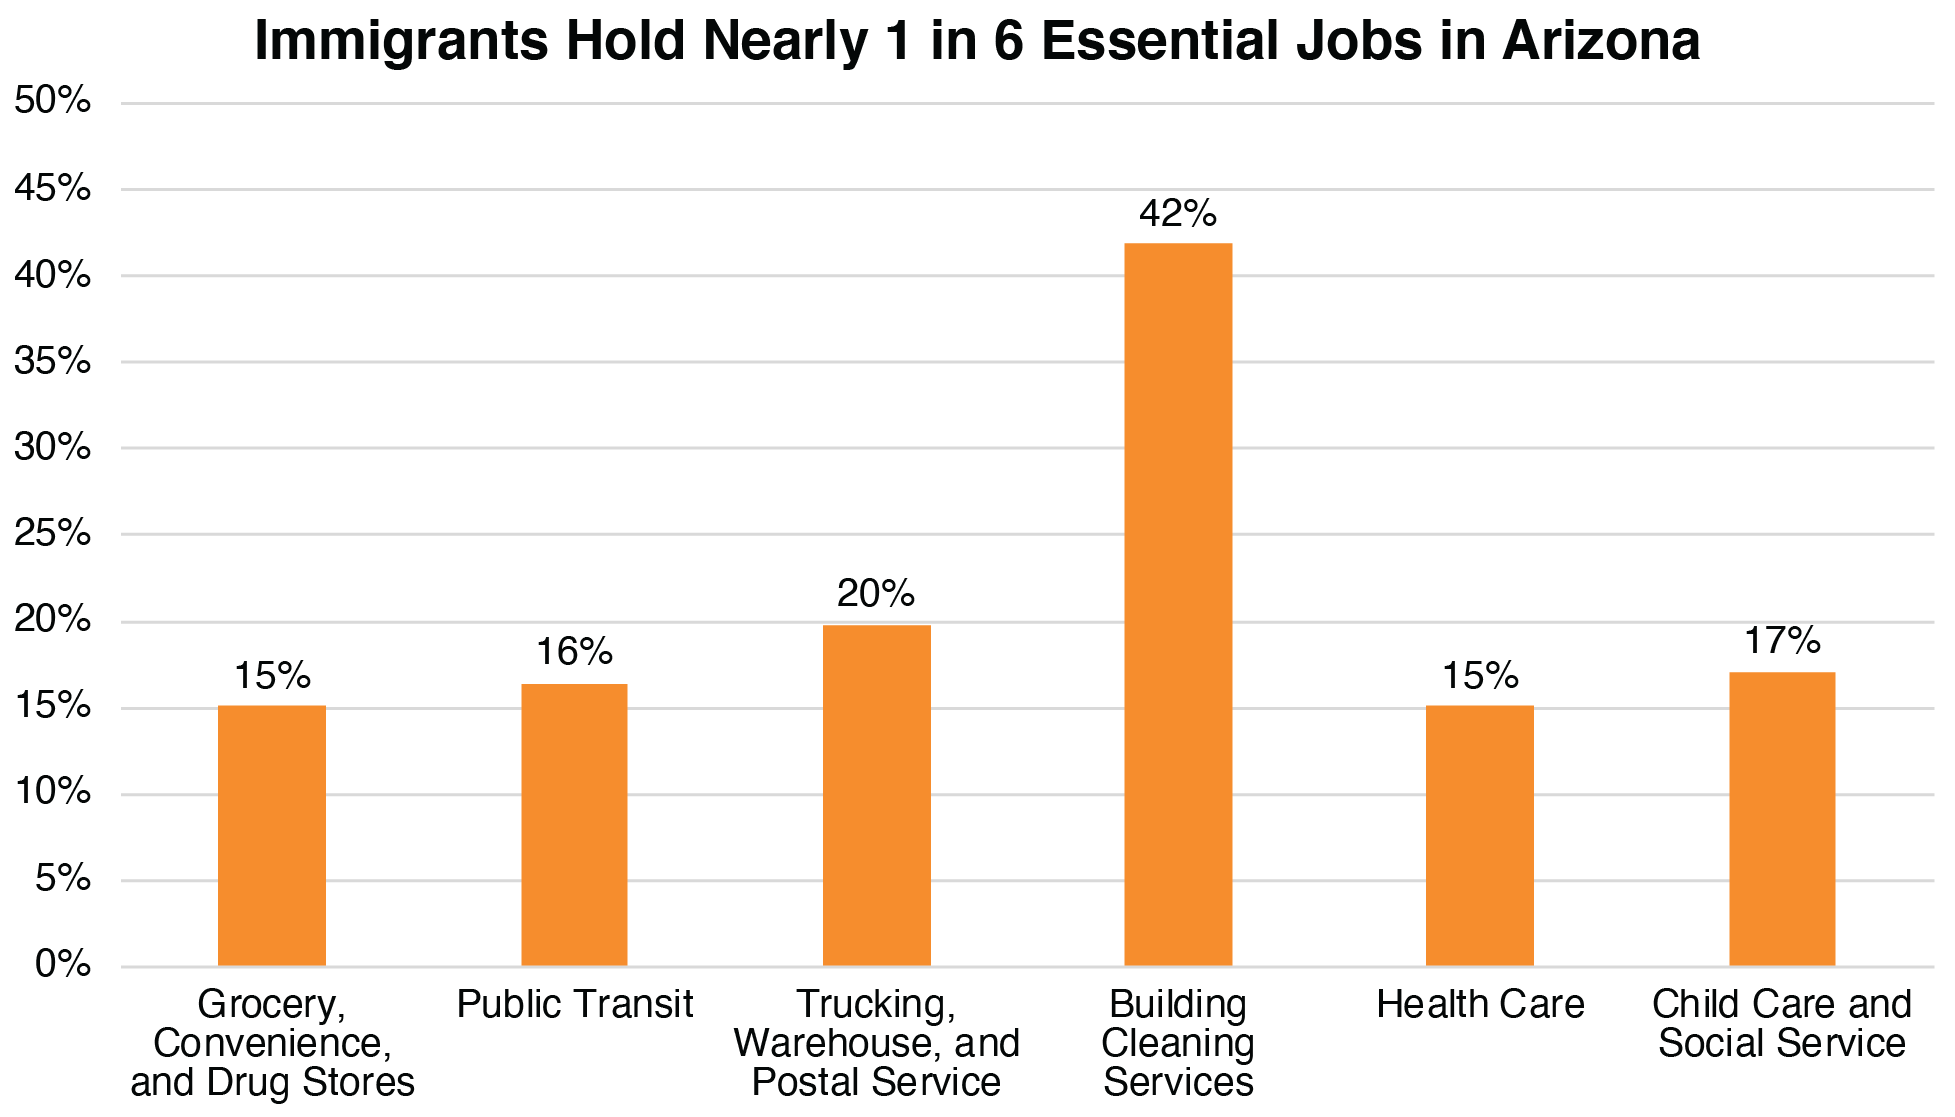 Immigrants hold nearly 1 in 6 essential jobs in Arizona